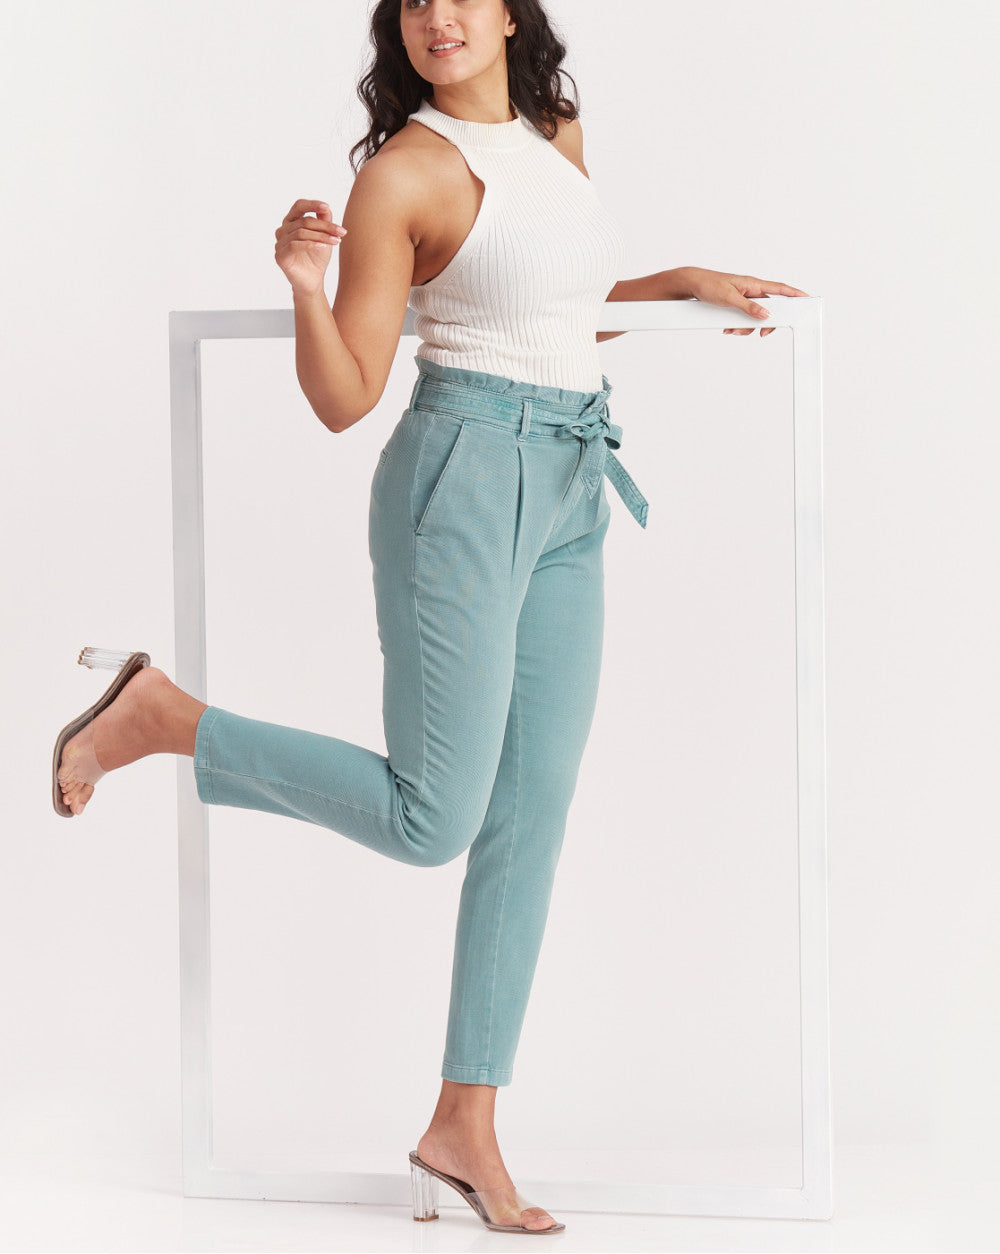 Tapered Fit Juan Tapered Garment-Dyed Pants - Teal